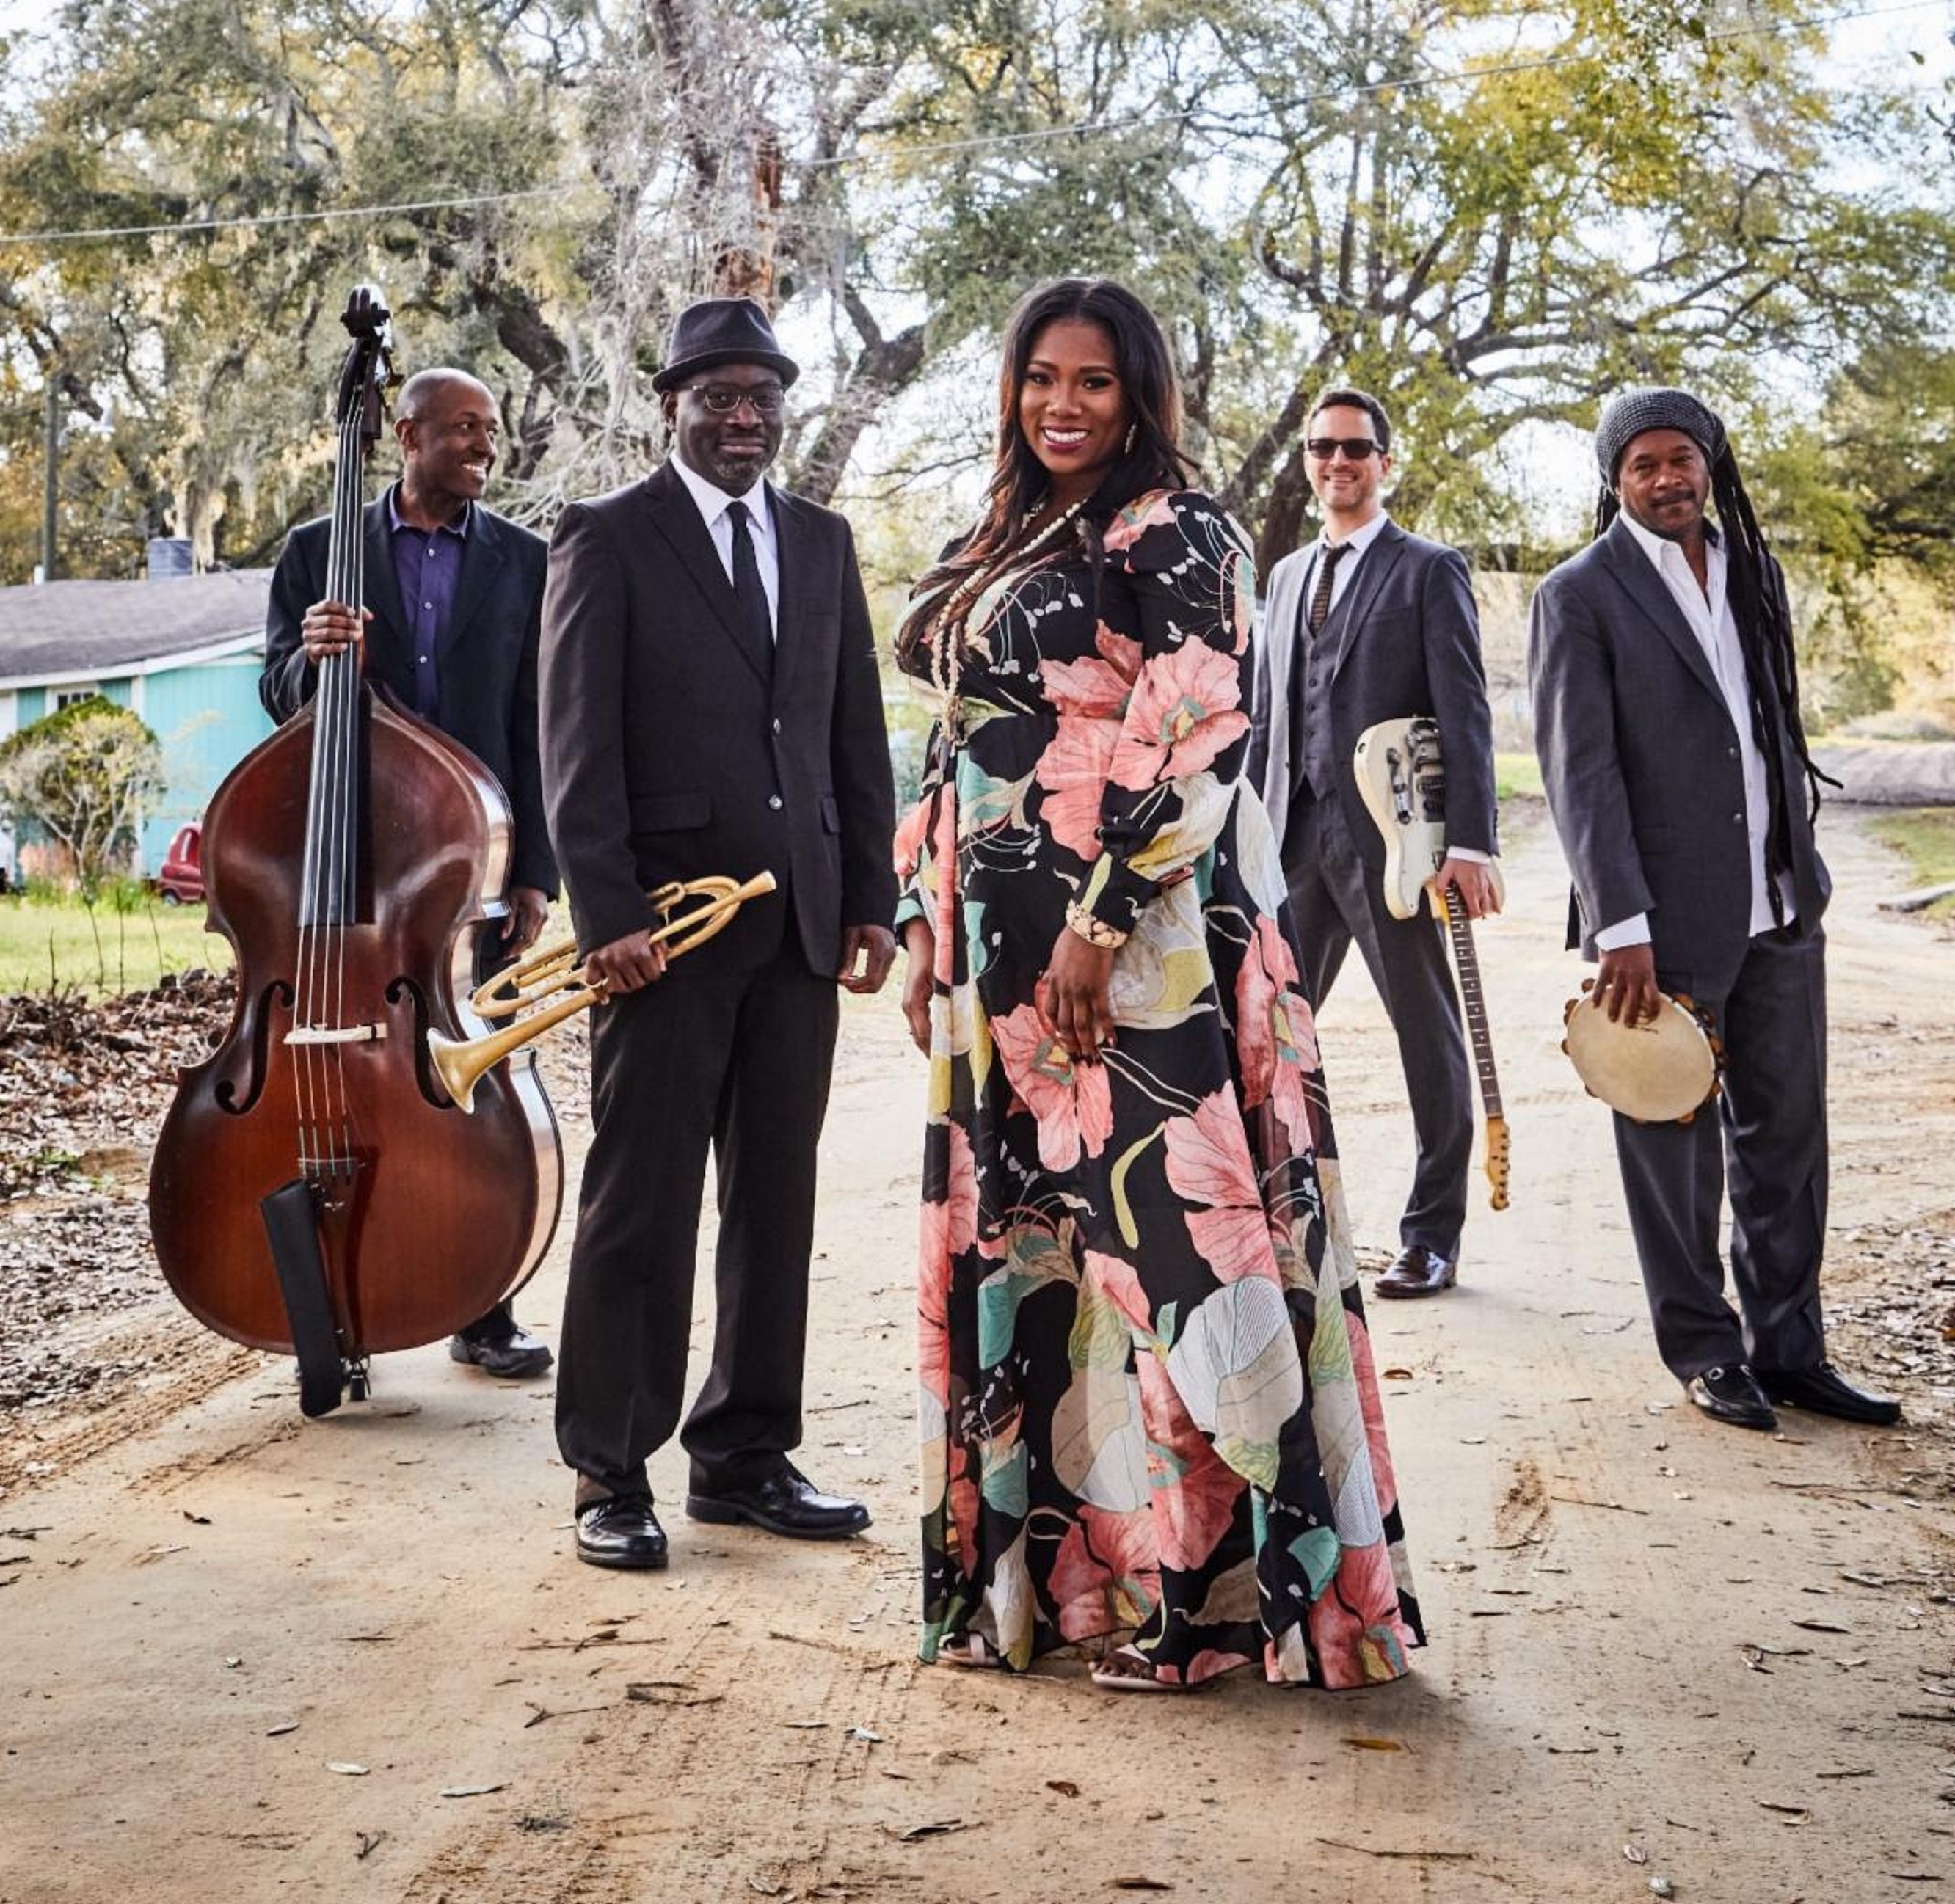 '23 GRAMMY nominees Ranky Tanky bring Gullah Music to NPR's Toast Of The Nation